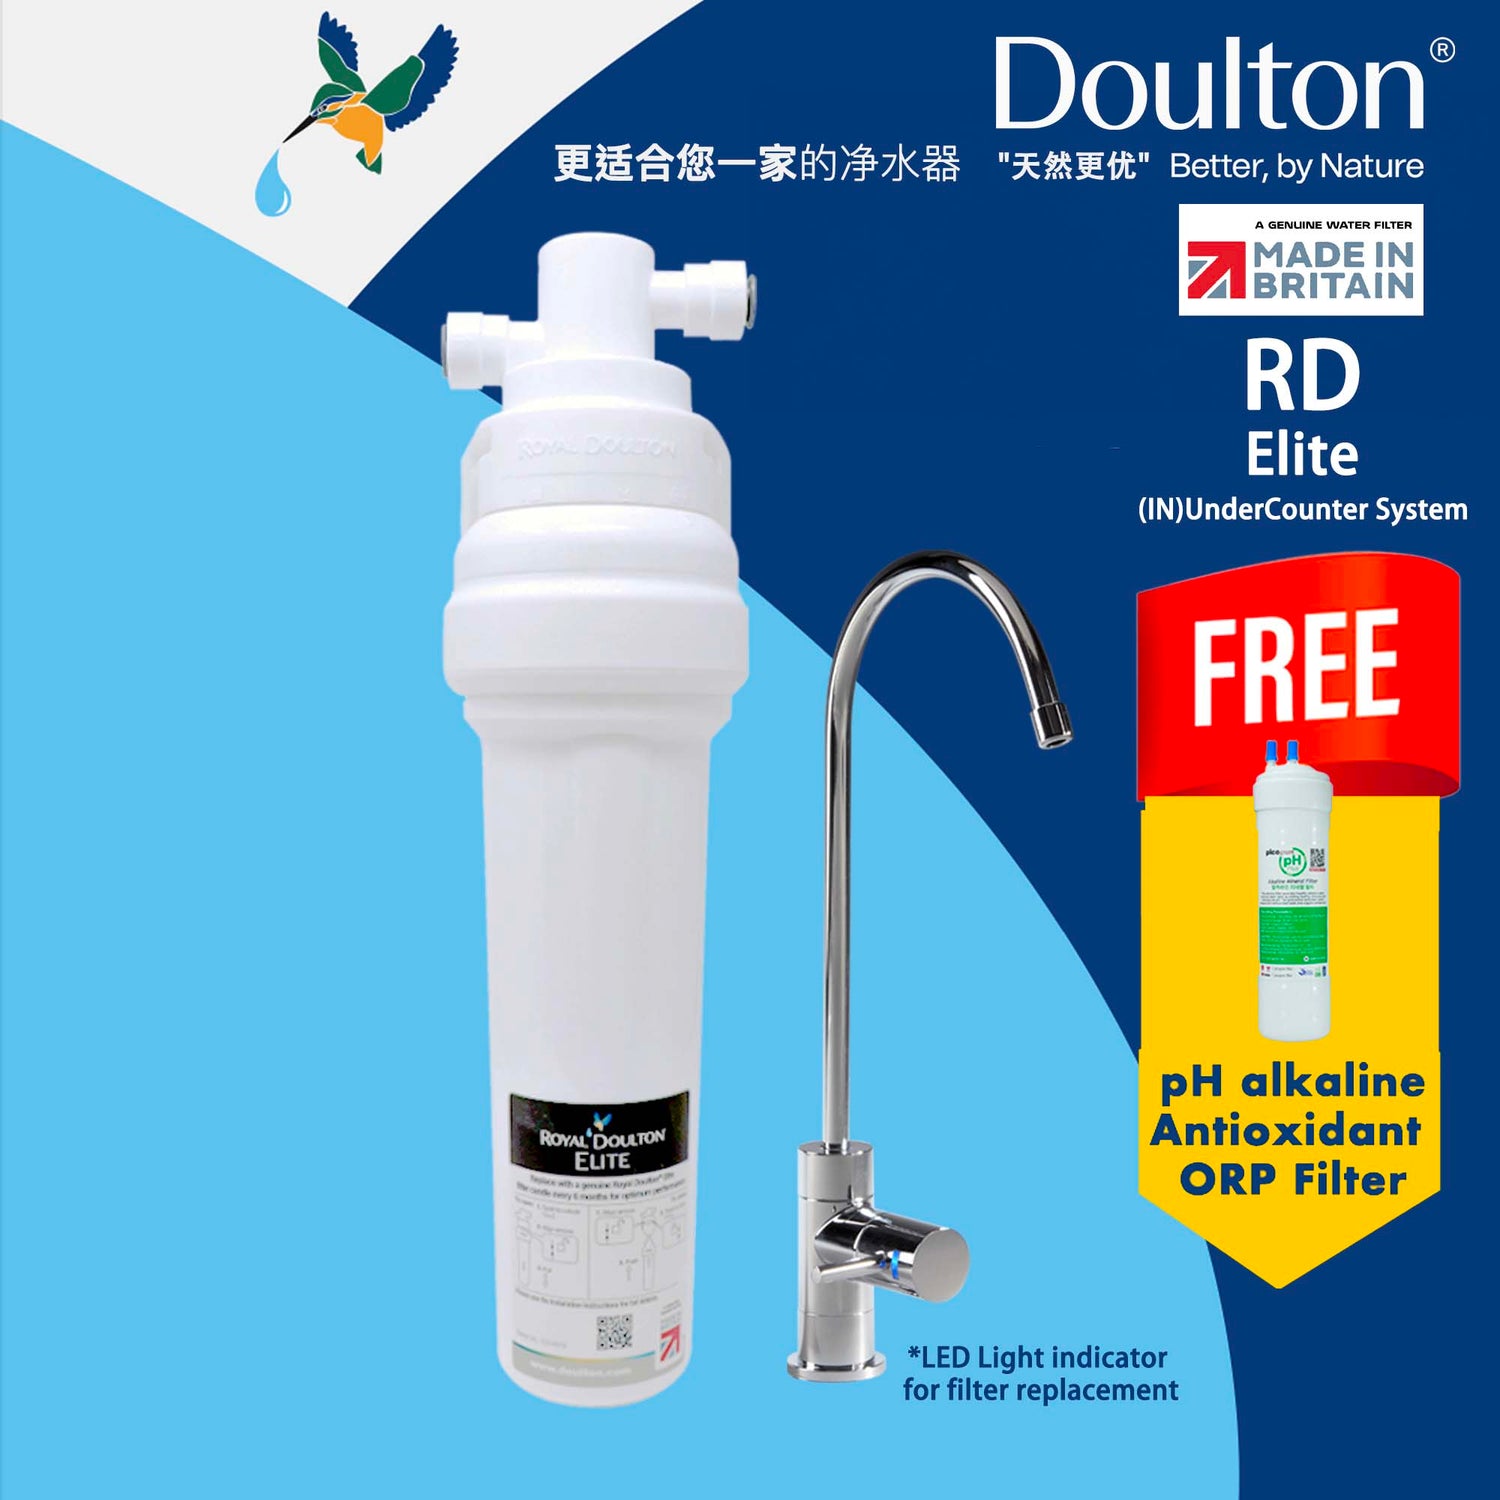 Royal Doulton Elite (IN)Undercounter Drinking Water Purifier System (with LED Indicator for Filter Replacement)